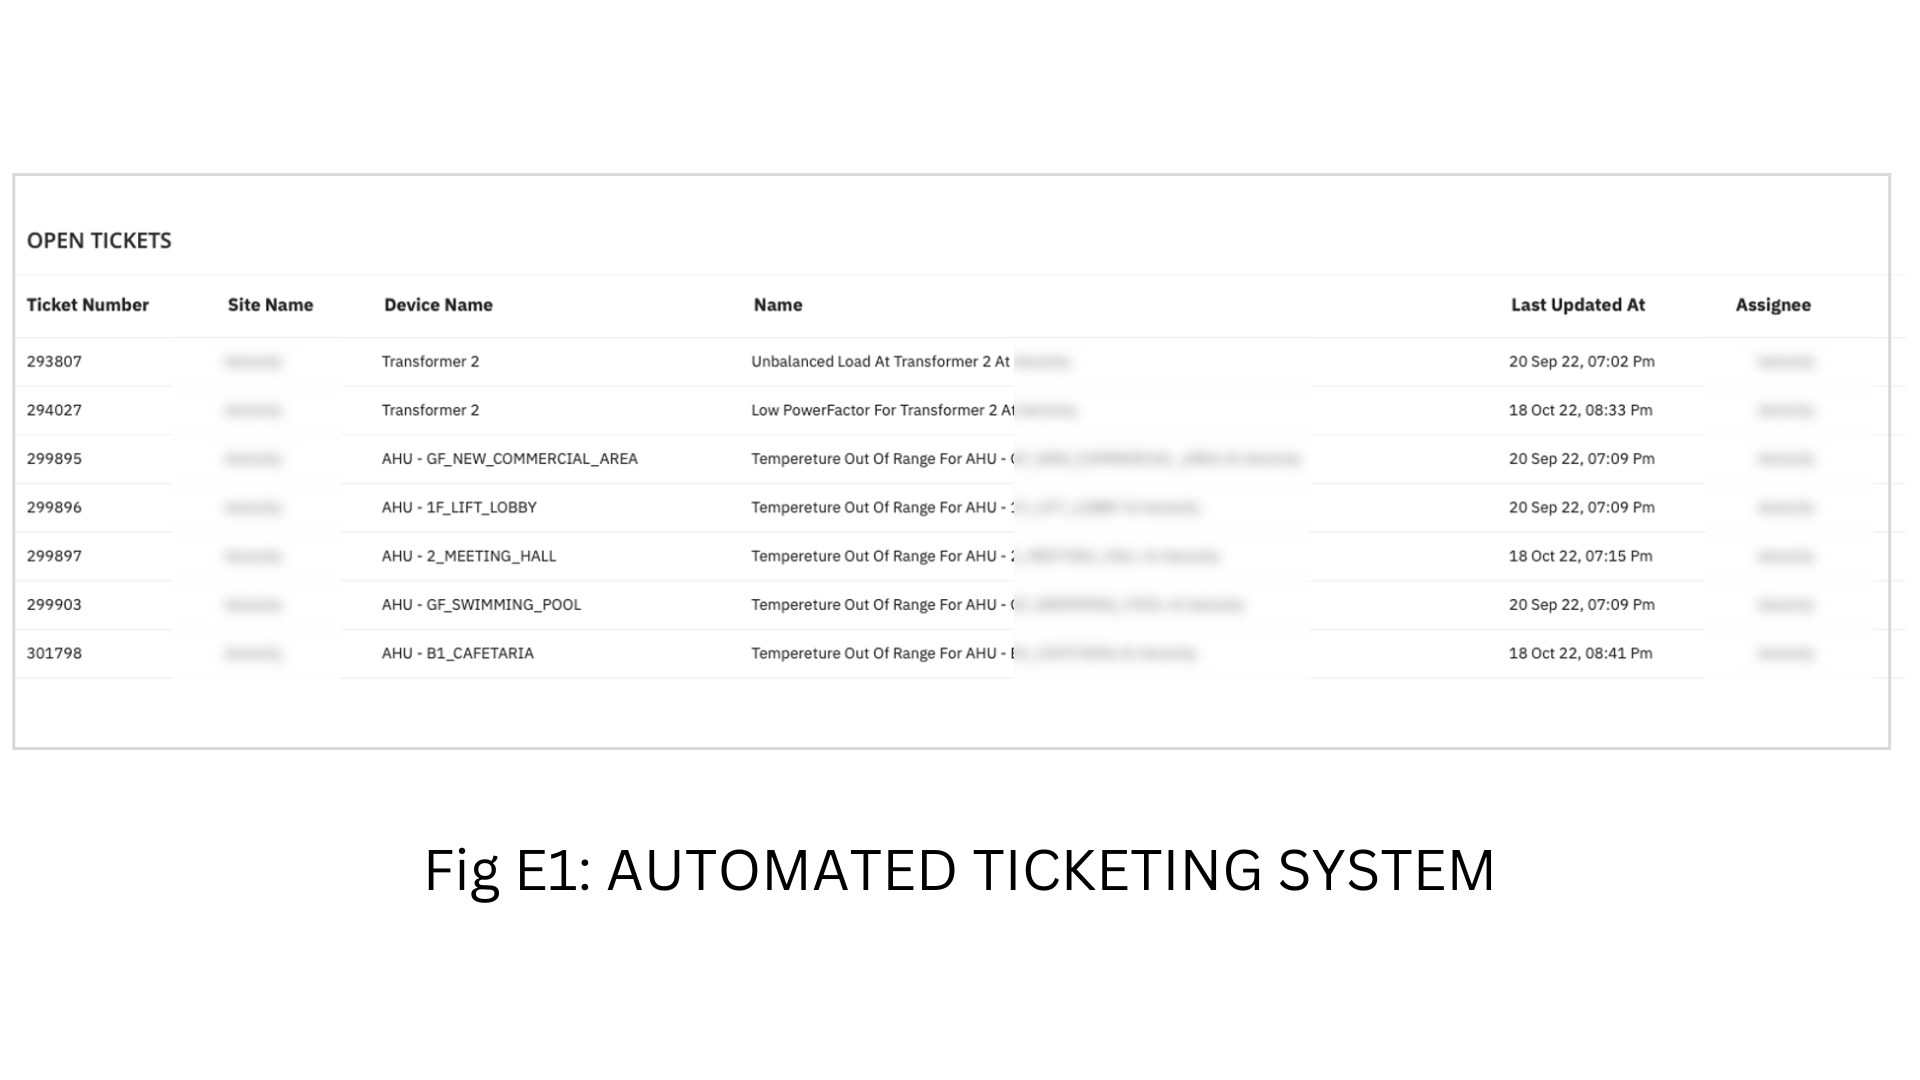 Automated ticketing system in an IoT BMS